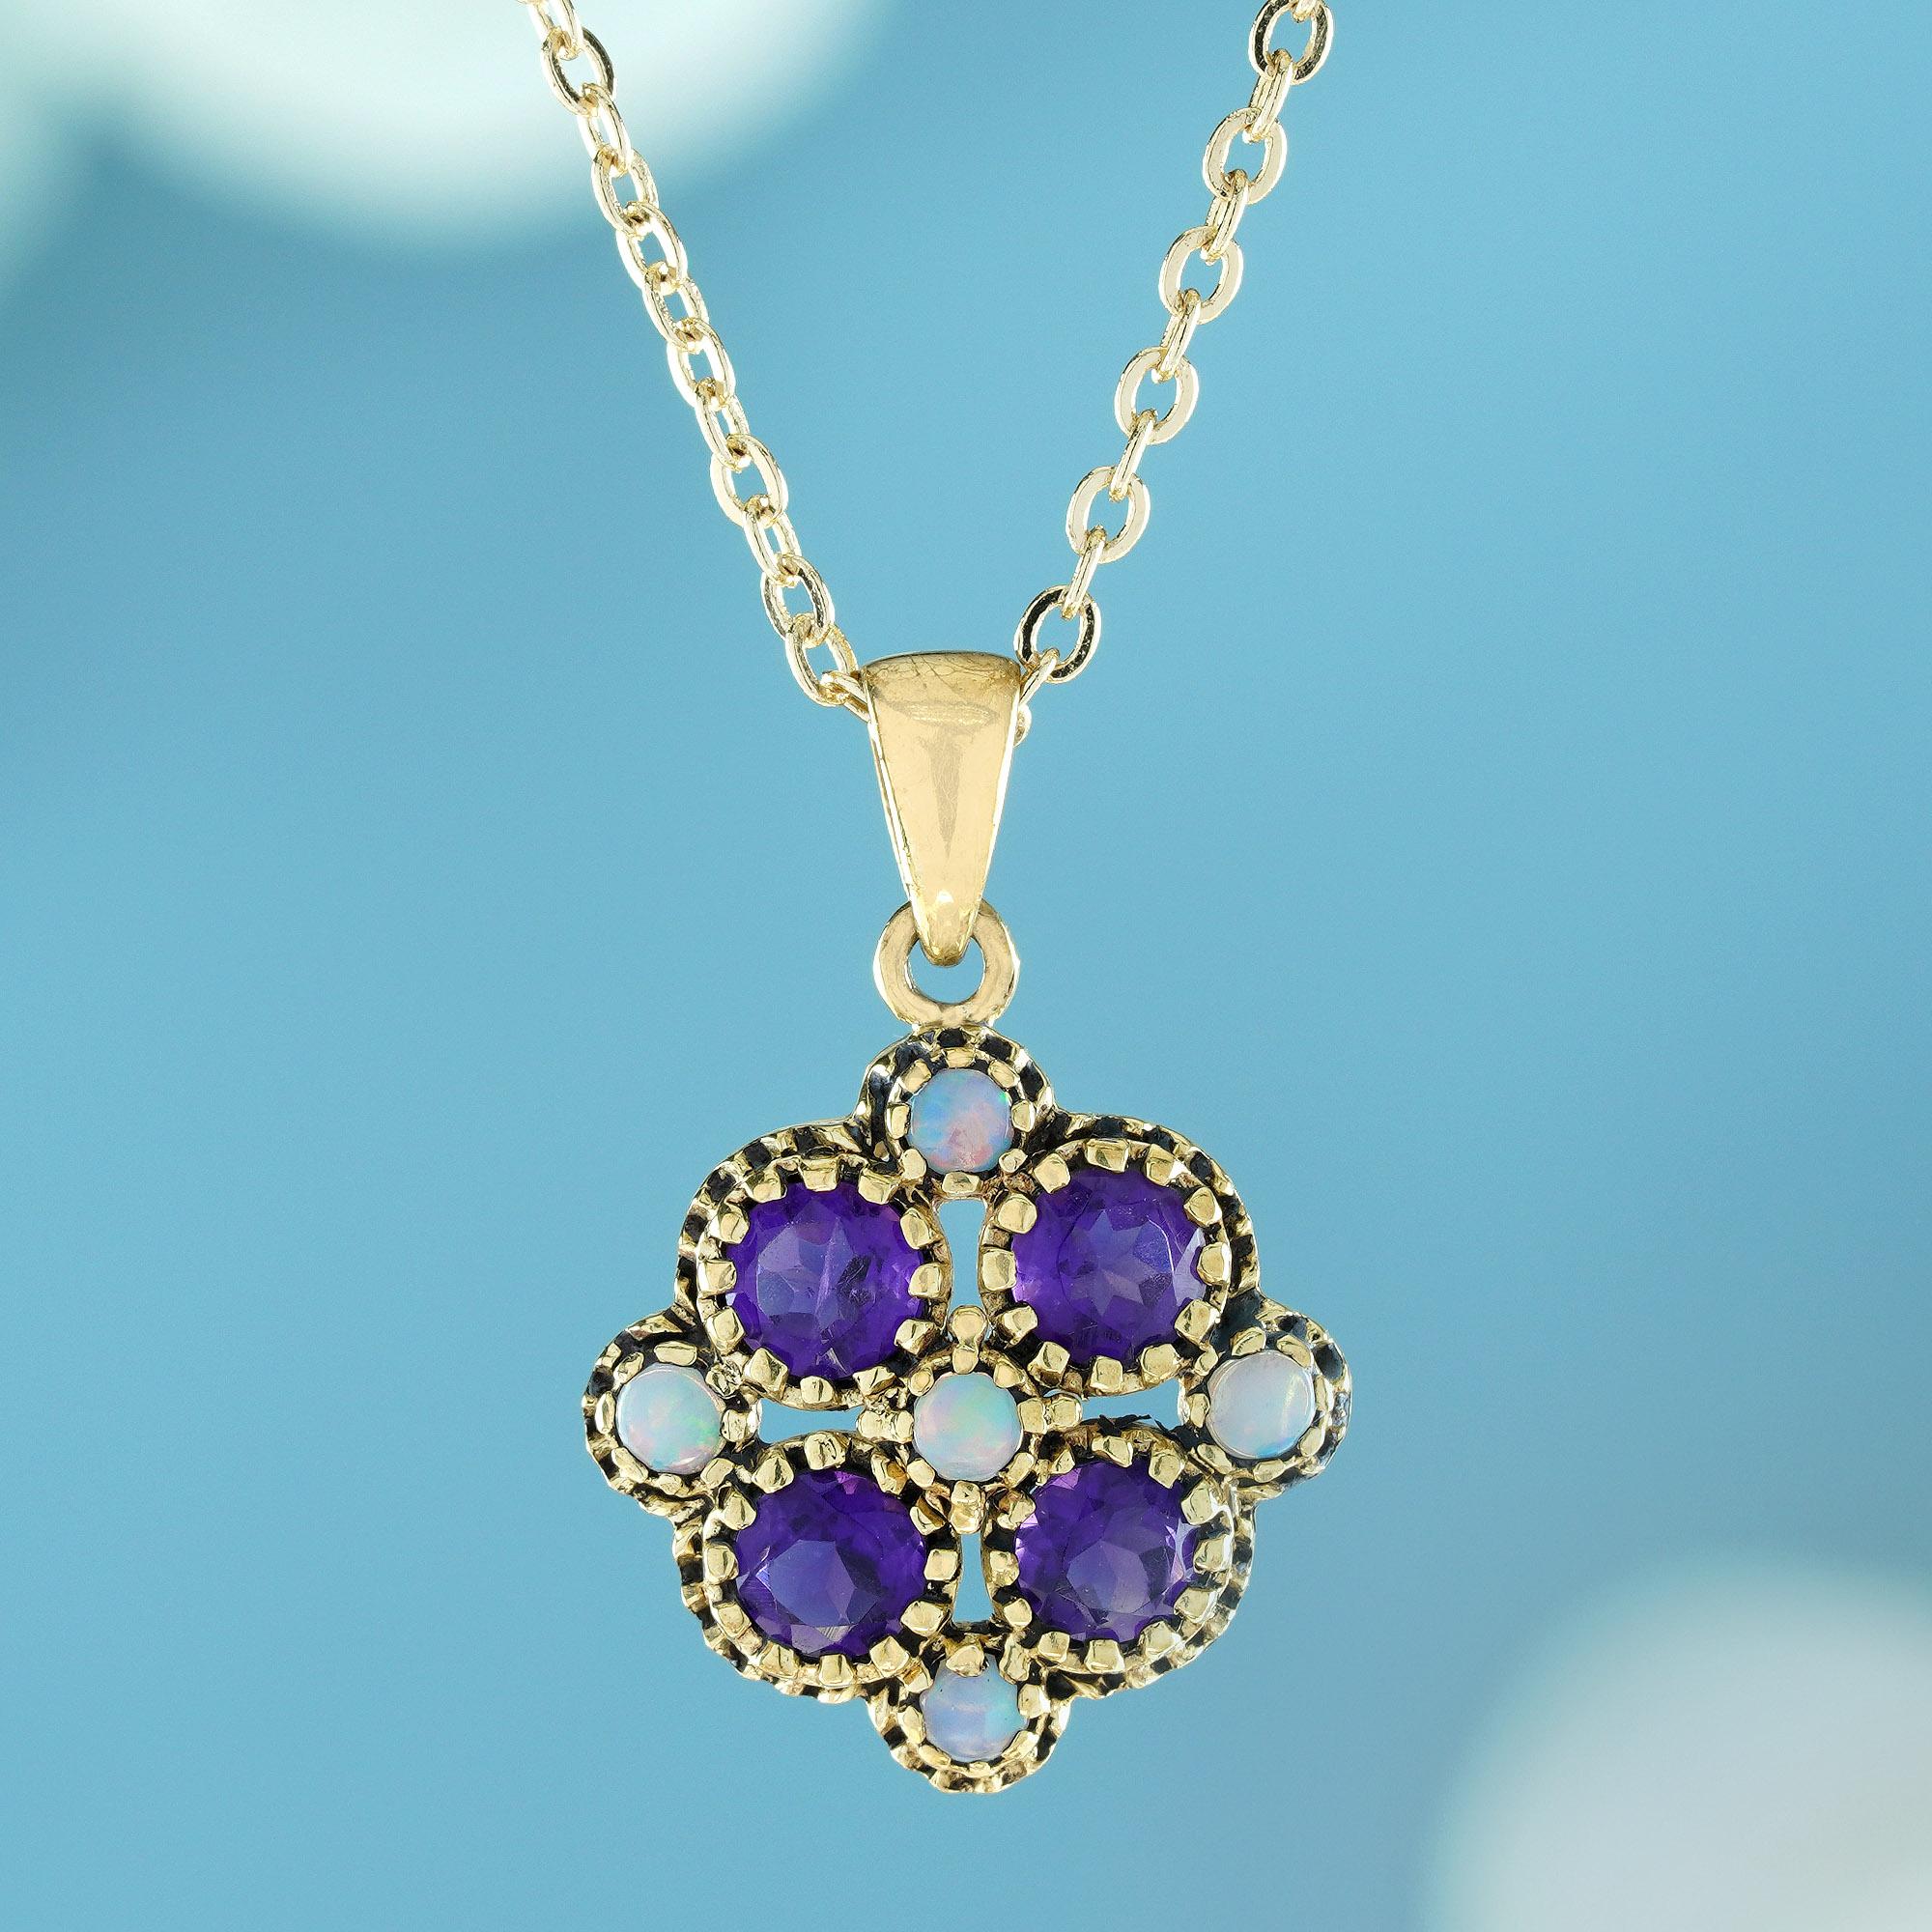  Crafted from yellow gold in a migraine work, this elegant vintage-style floral pendant is embellished with four exquisite round purple amethysts, each resembling delicate petals. Nestled between each amethyst are smaller white opals, adding a